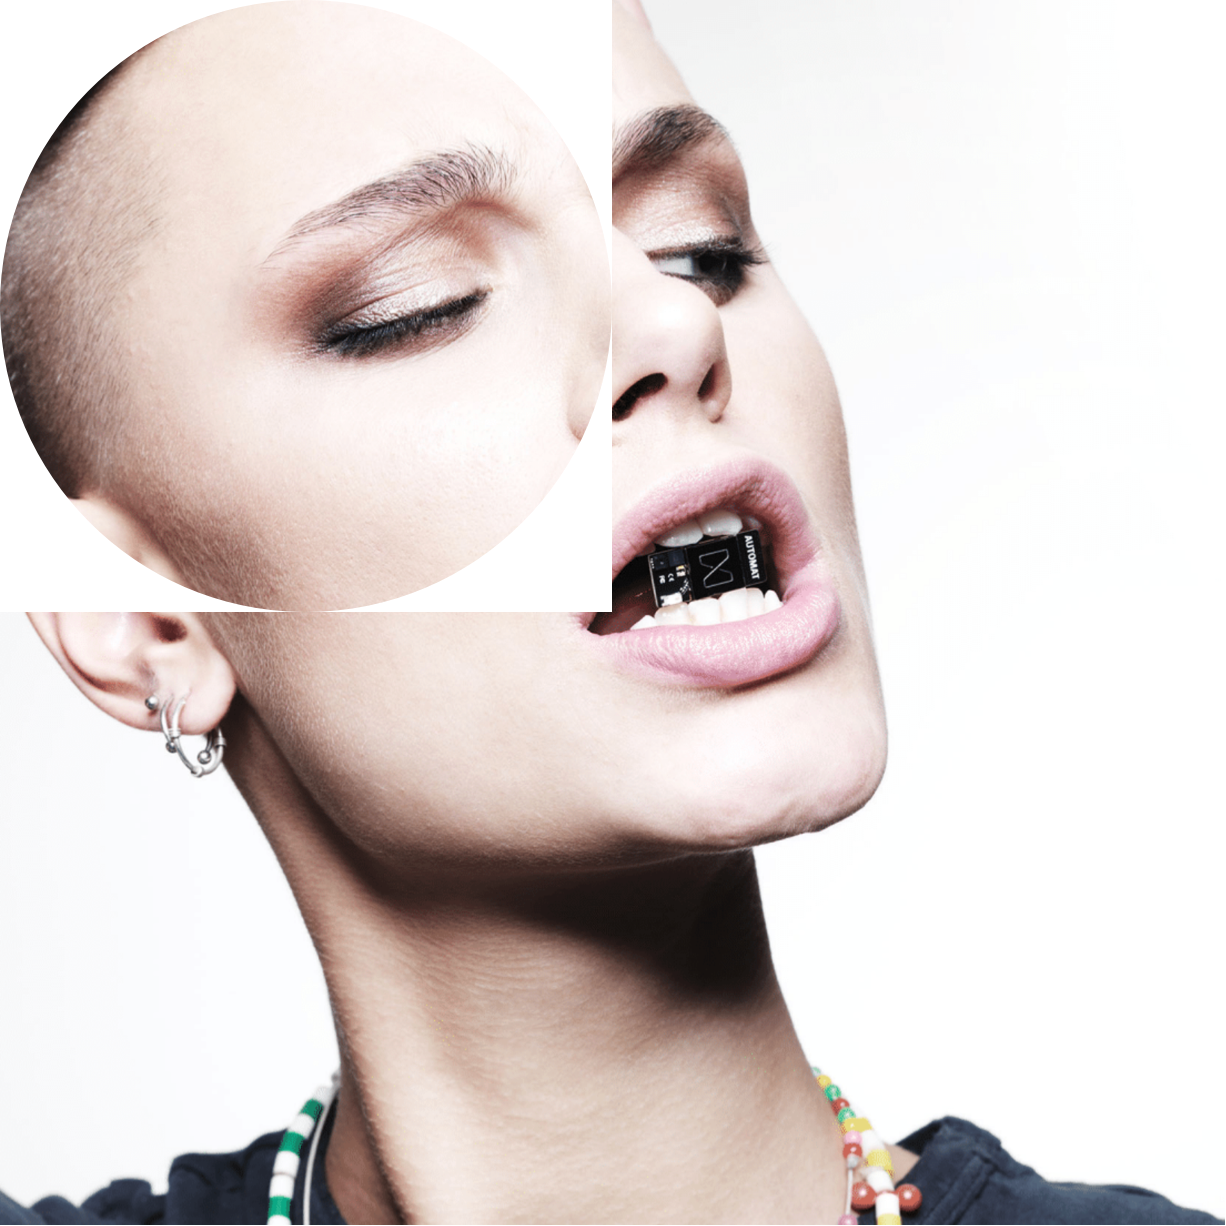 A woman with a shaved head holds the tiny Neue microchip between her teeth.